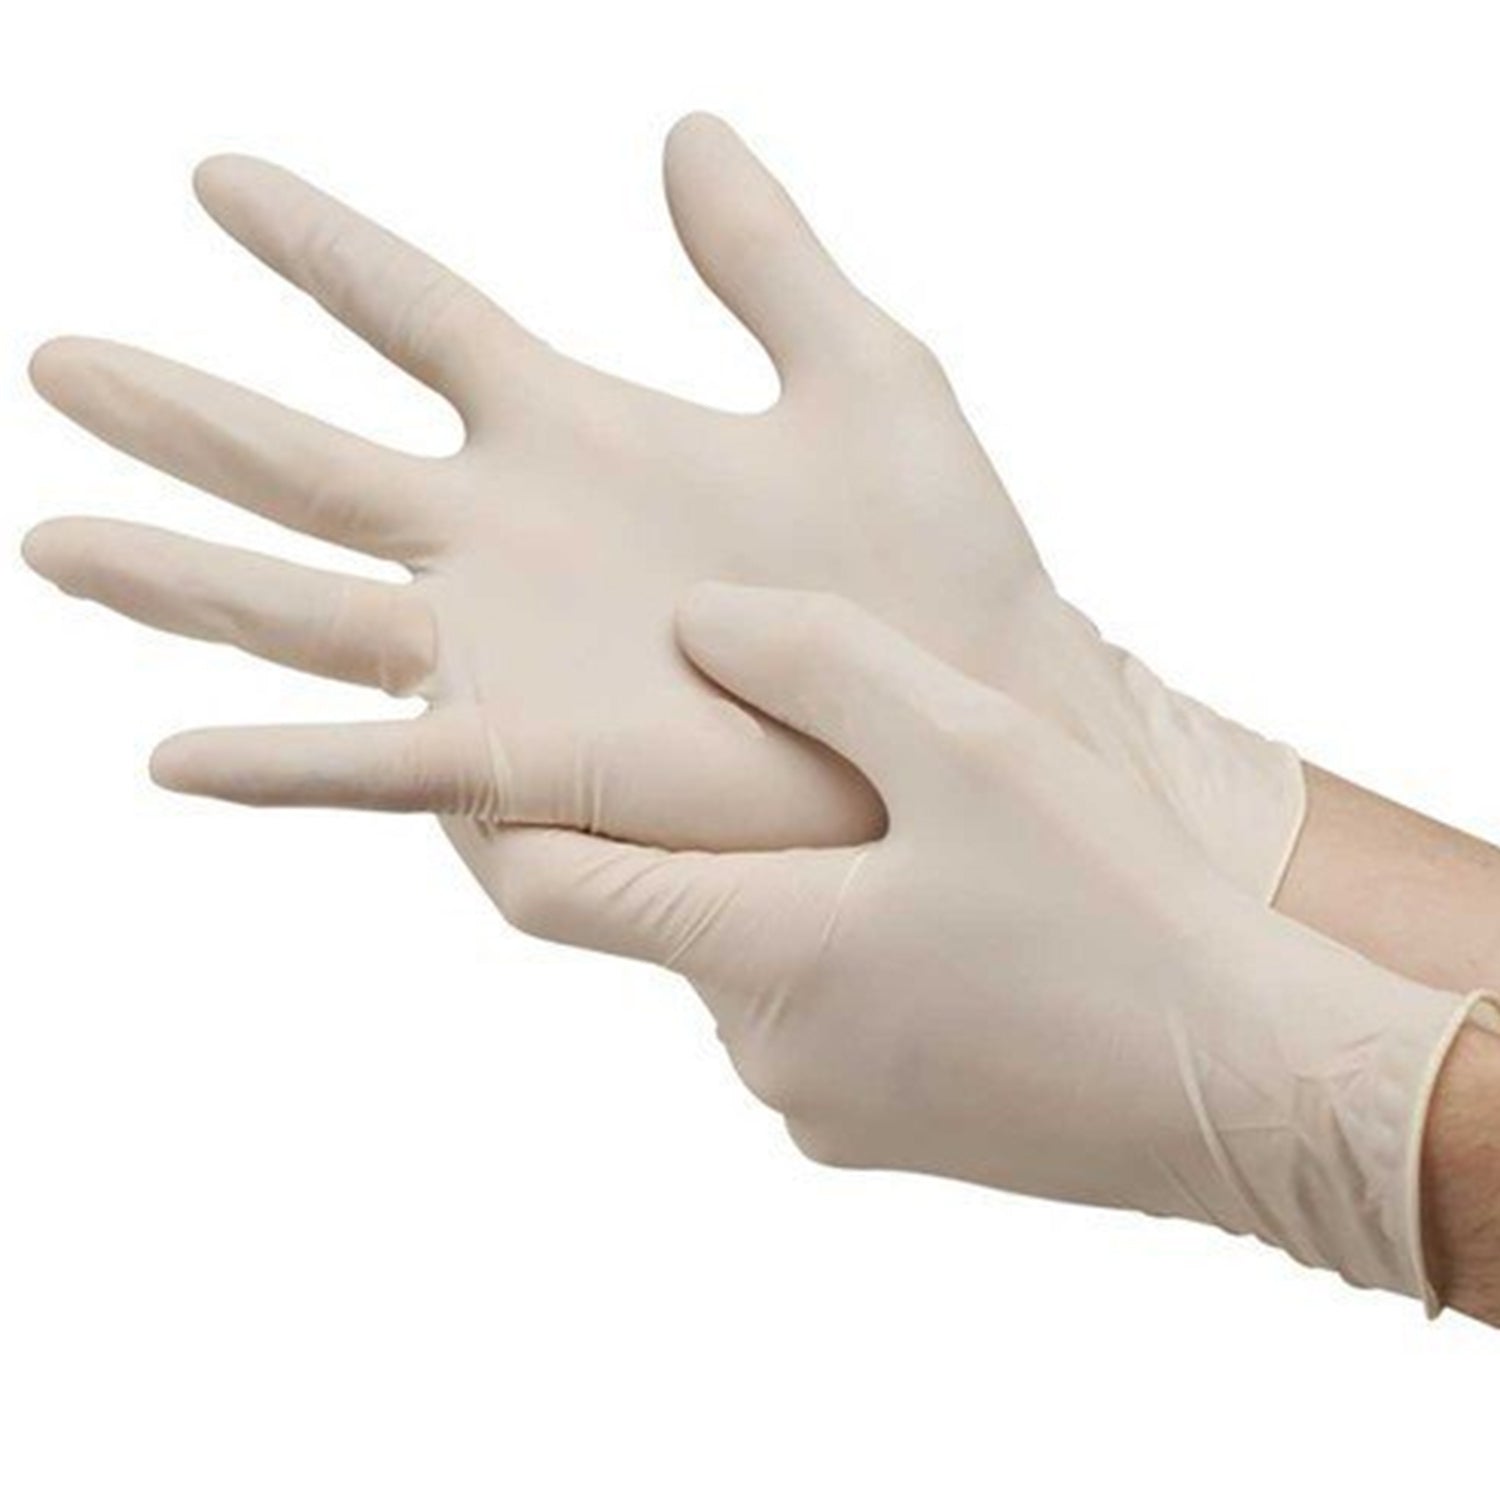 Premier Latex Sterile Powder Free Gloves | Small | Pack of 50 pairs (6)